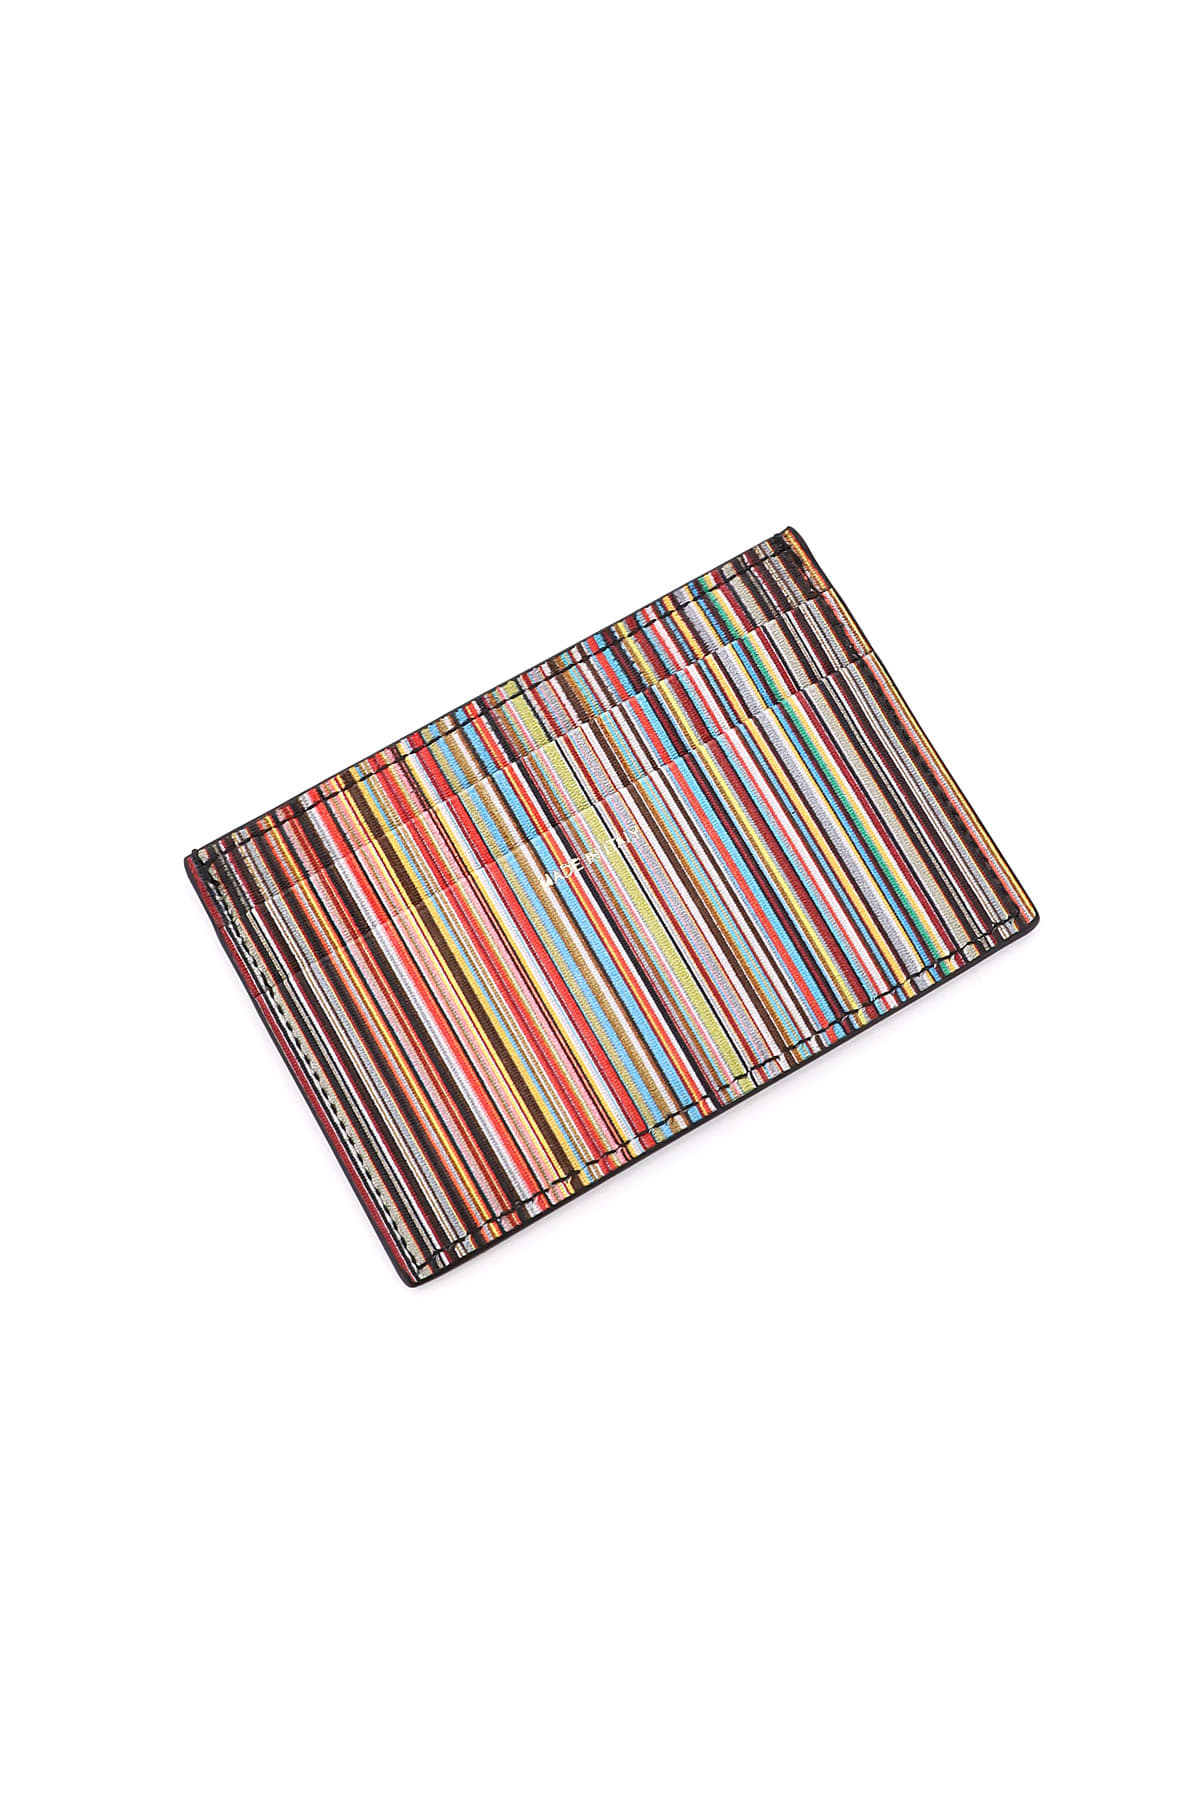 Shop Paul Smith Striped Card Holder In Black/red